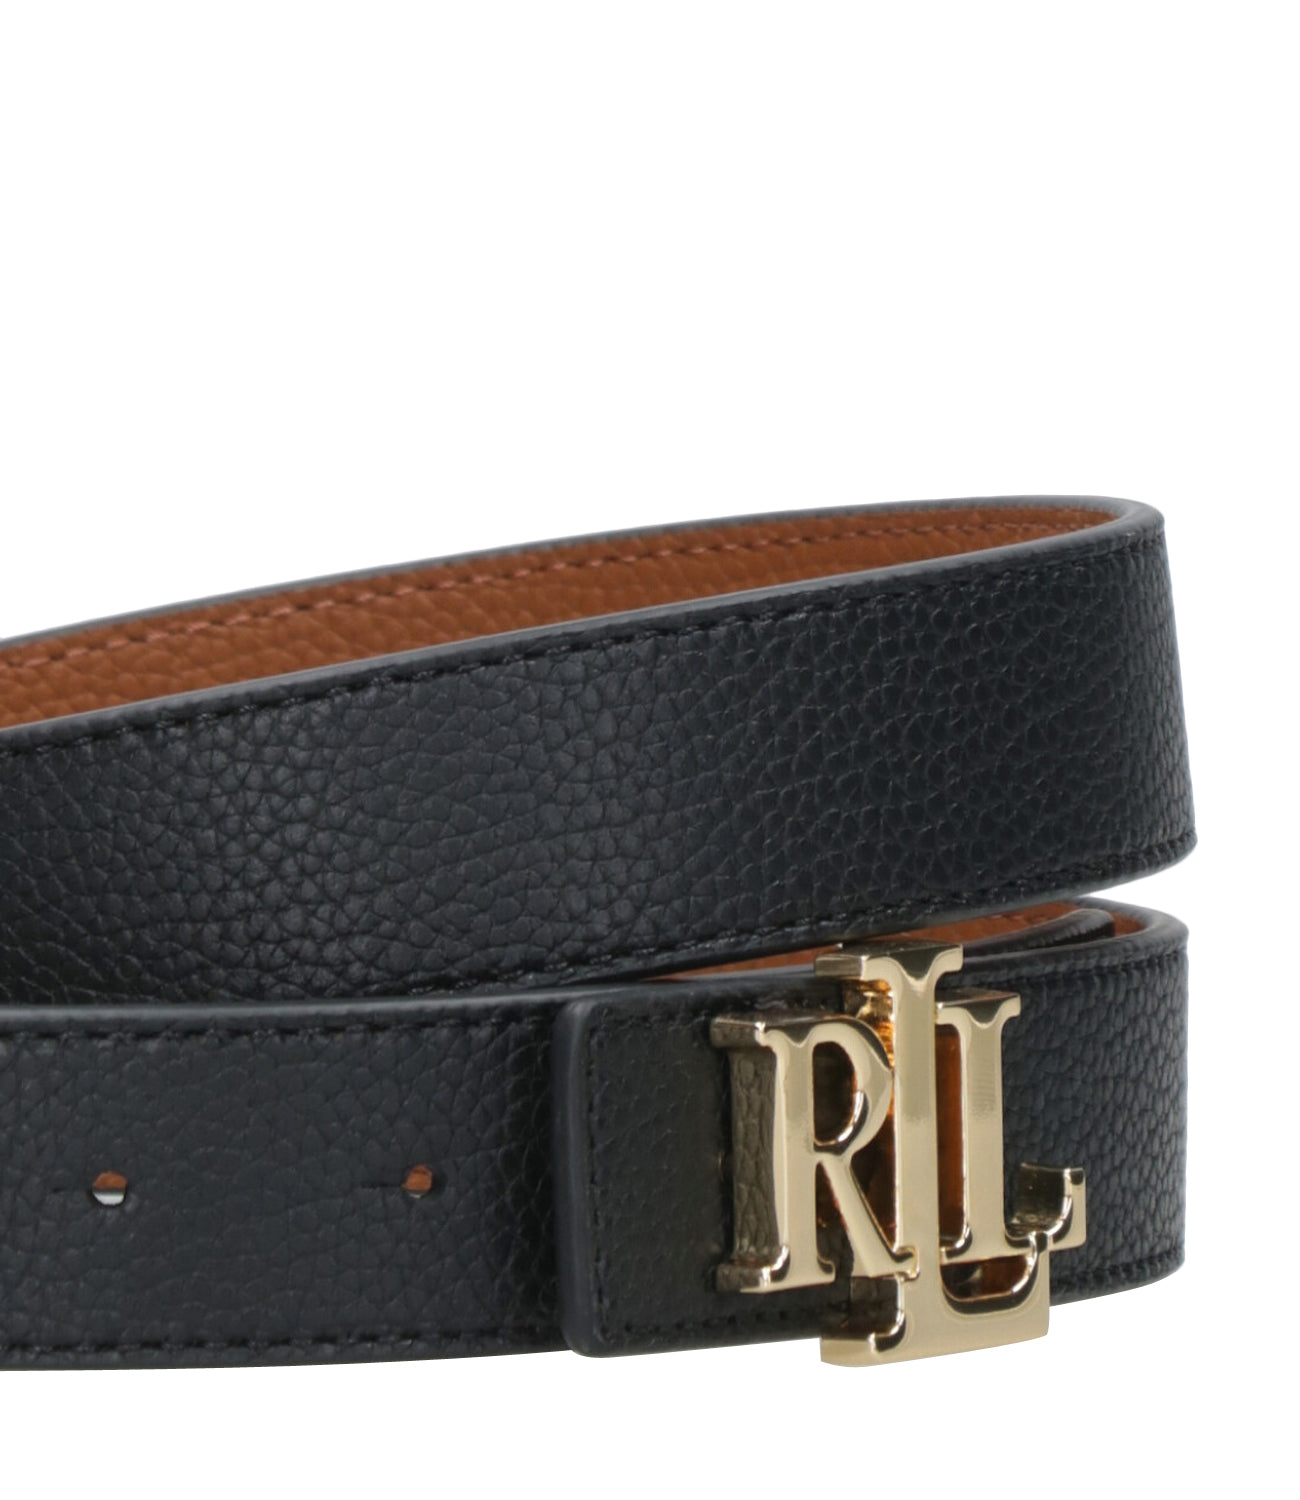 Polo Ralph Lauren | Black and Leather Belt